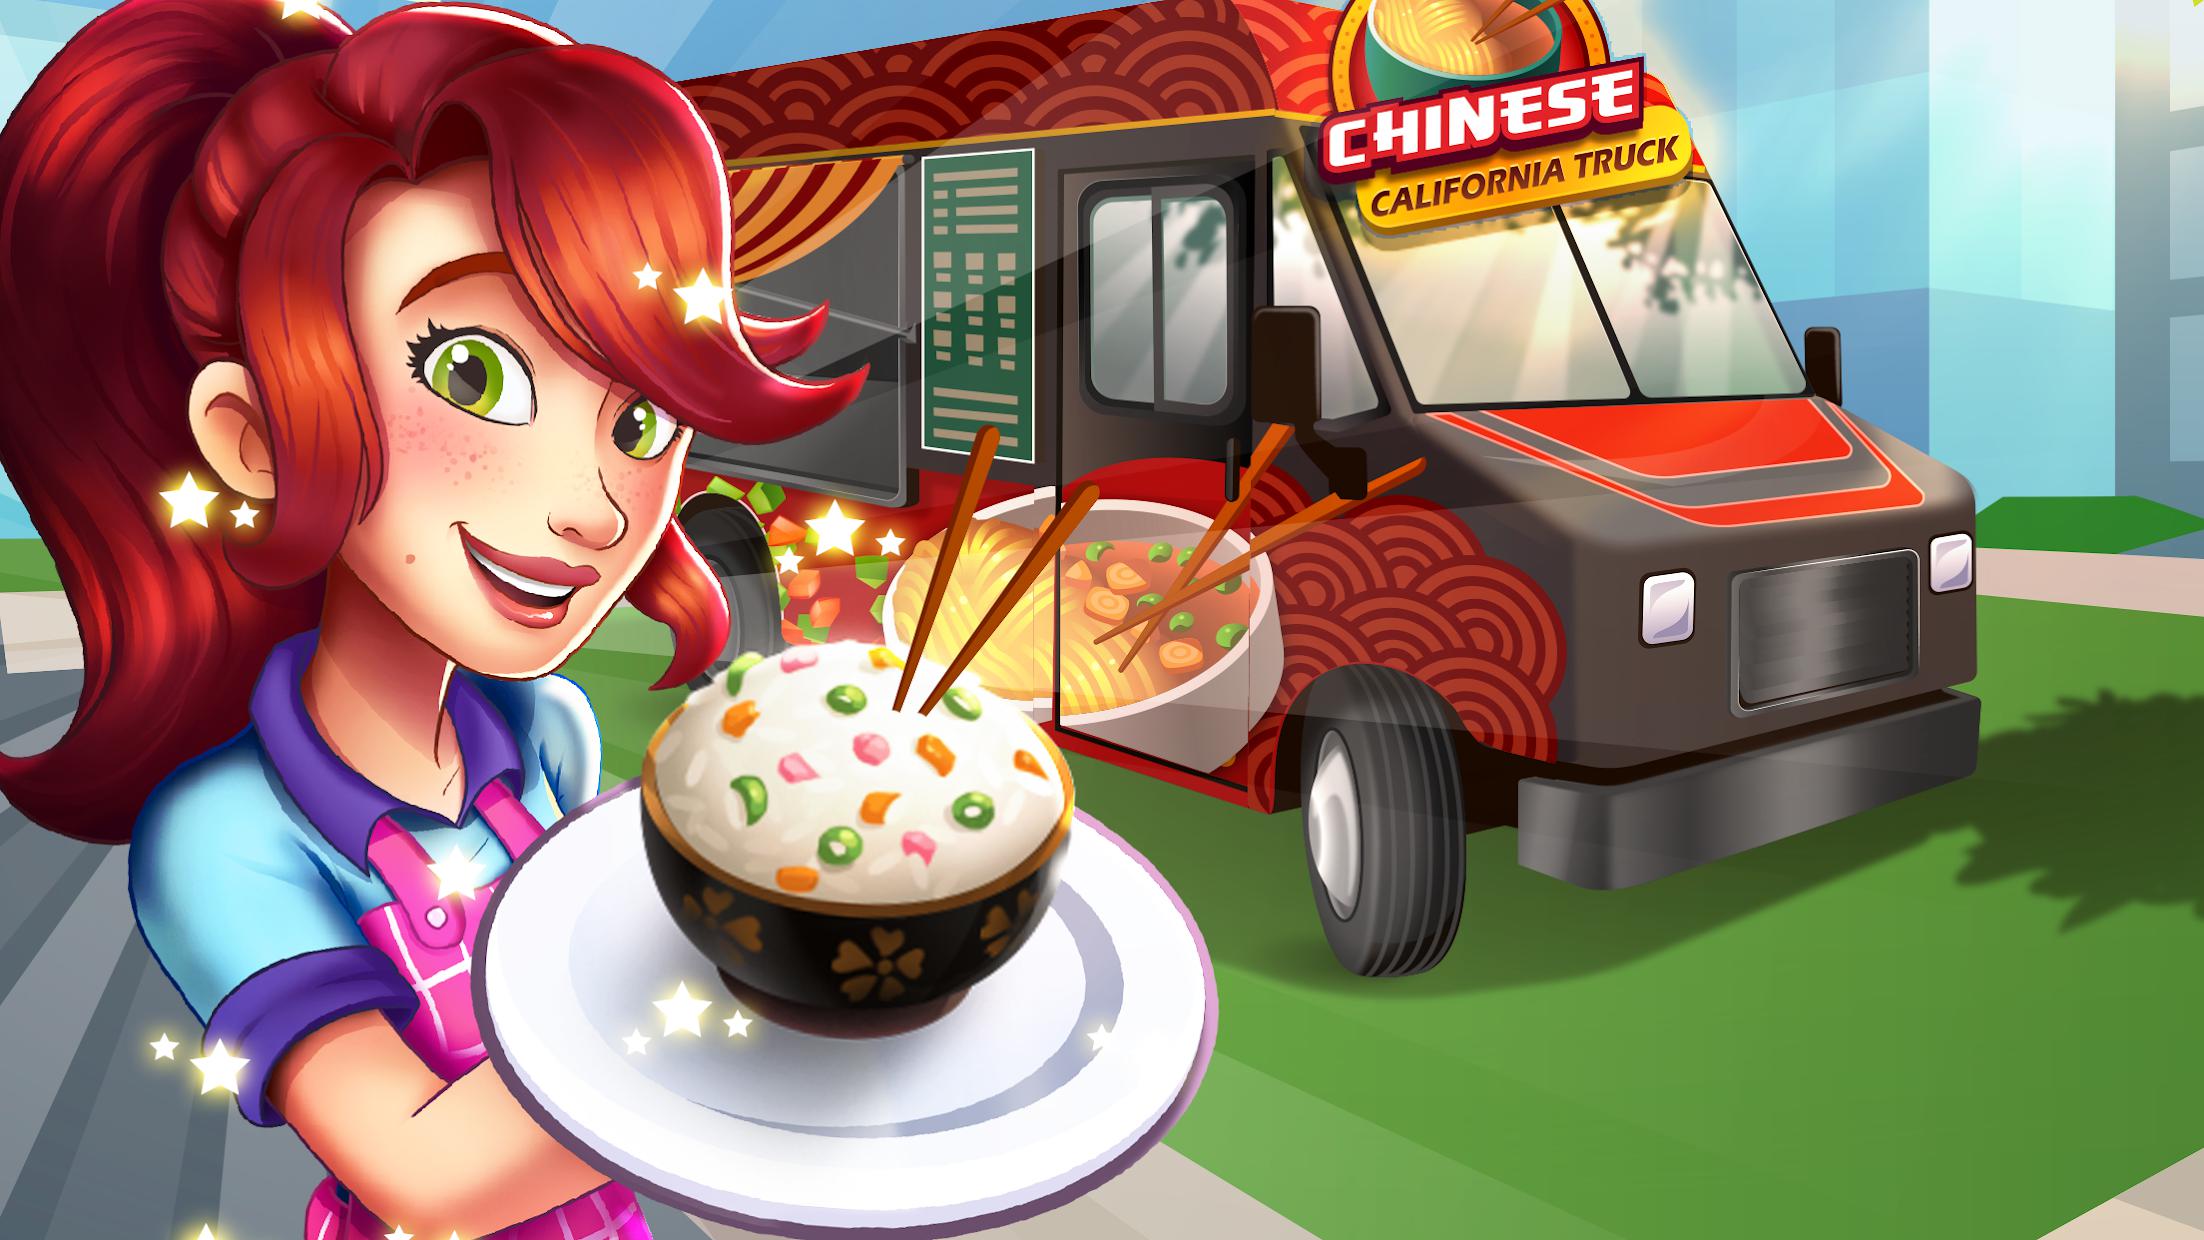  California Truck - Fast Food Cooking Game_截图_5